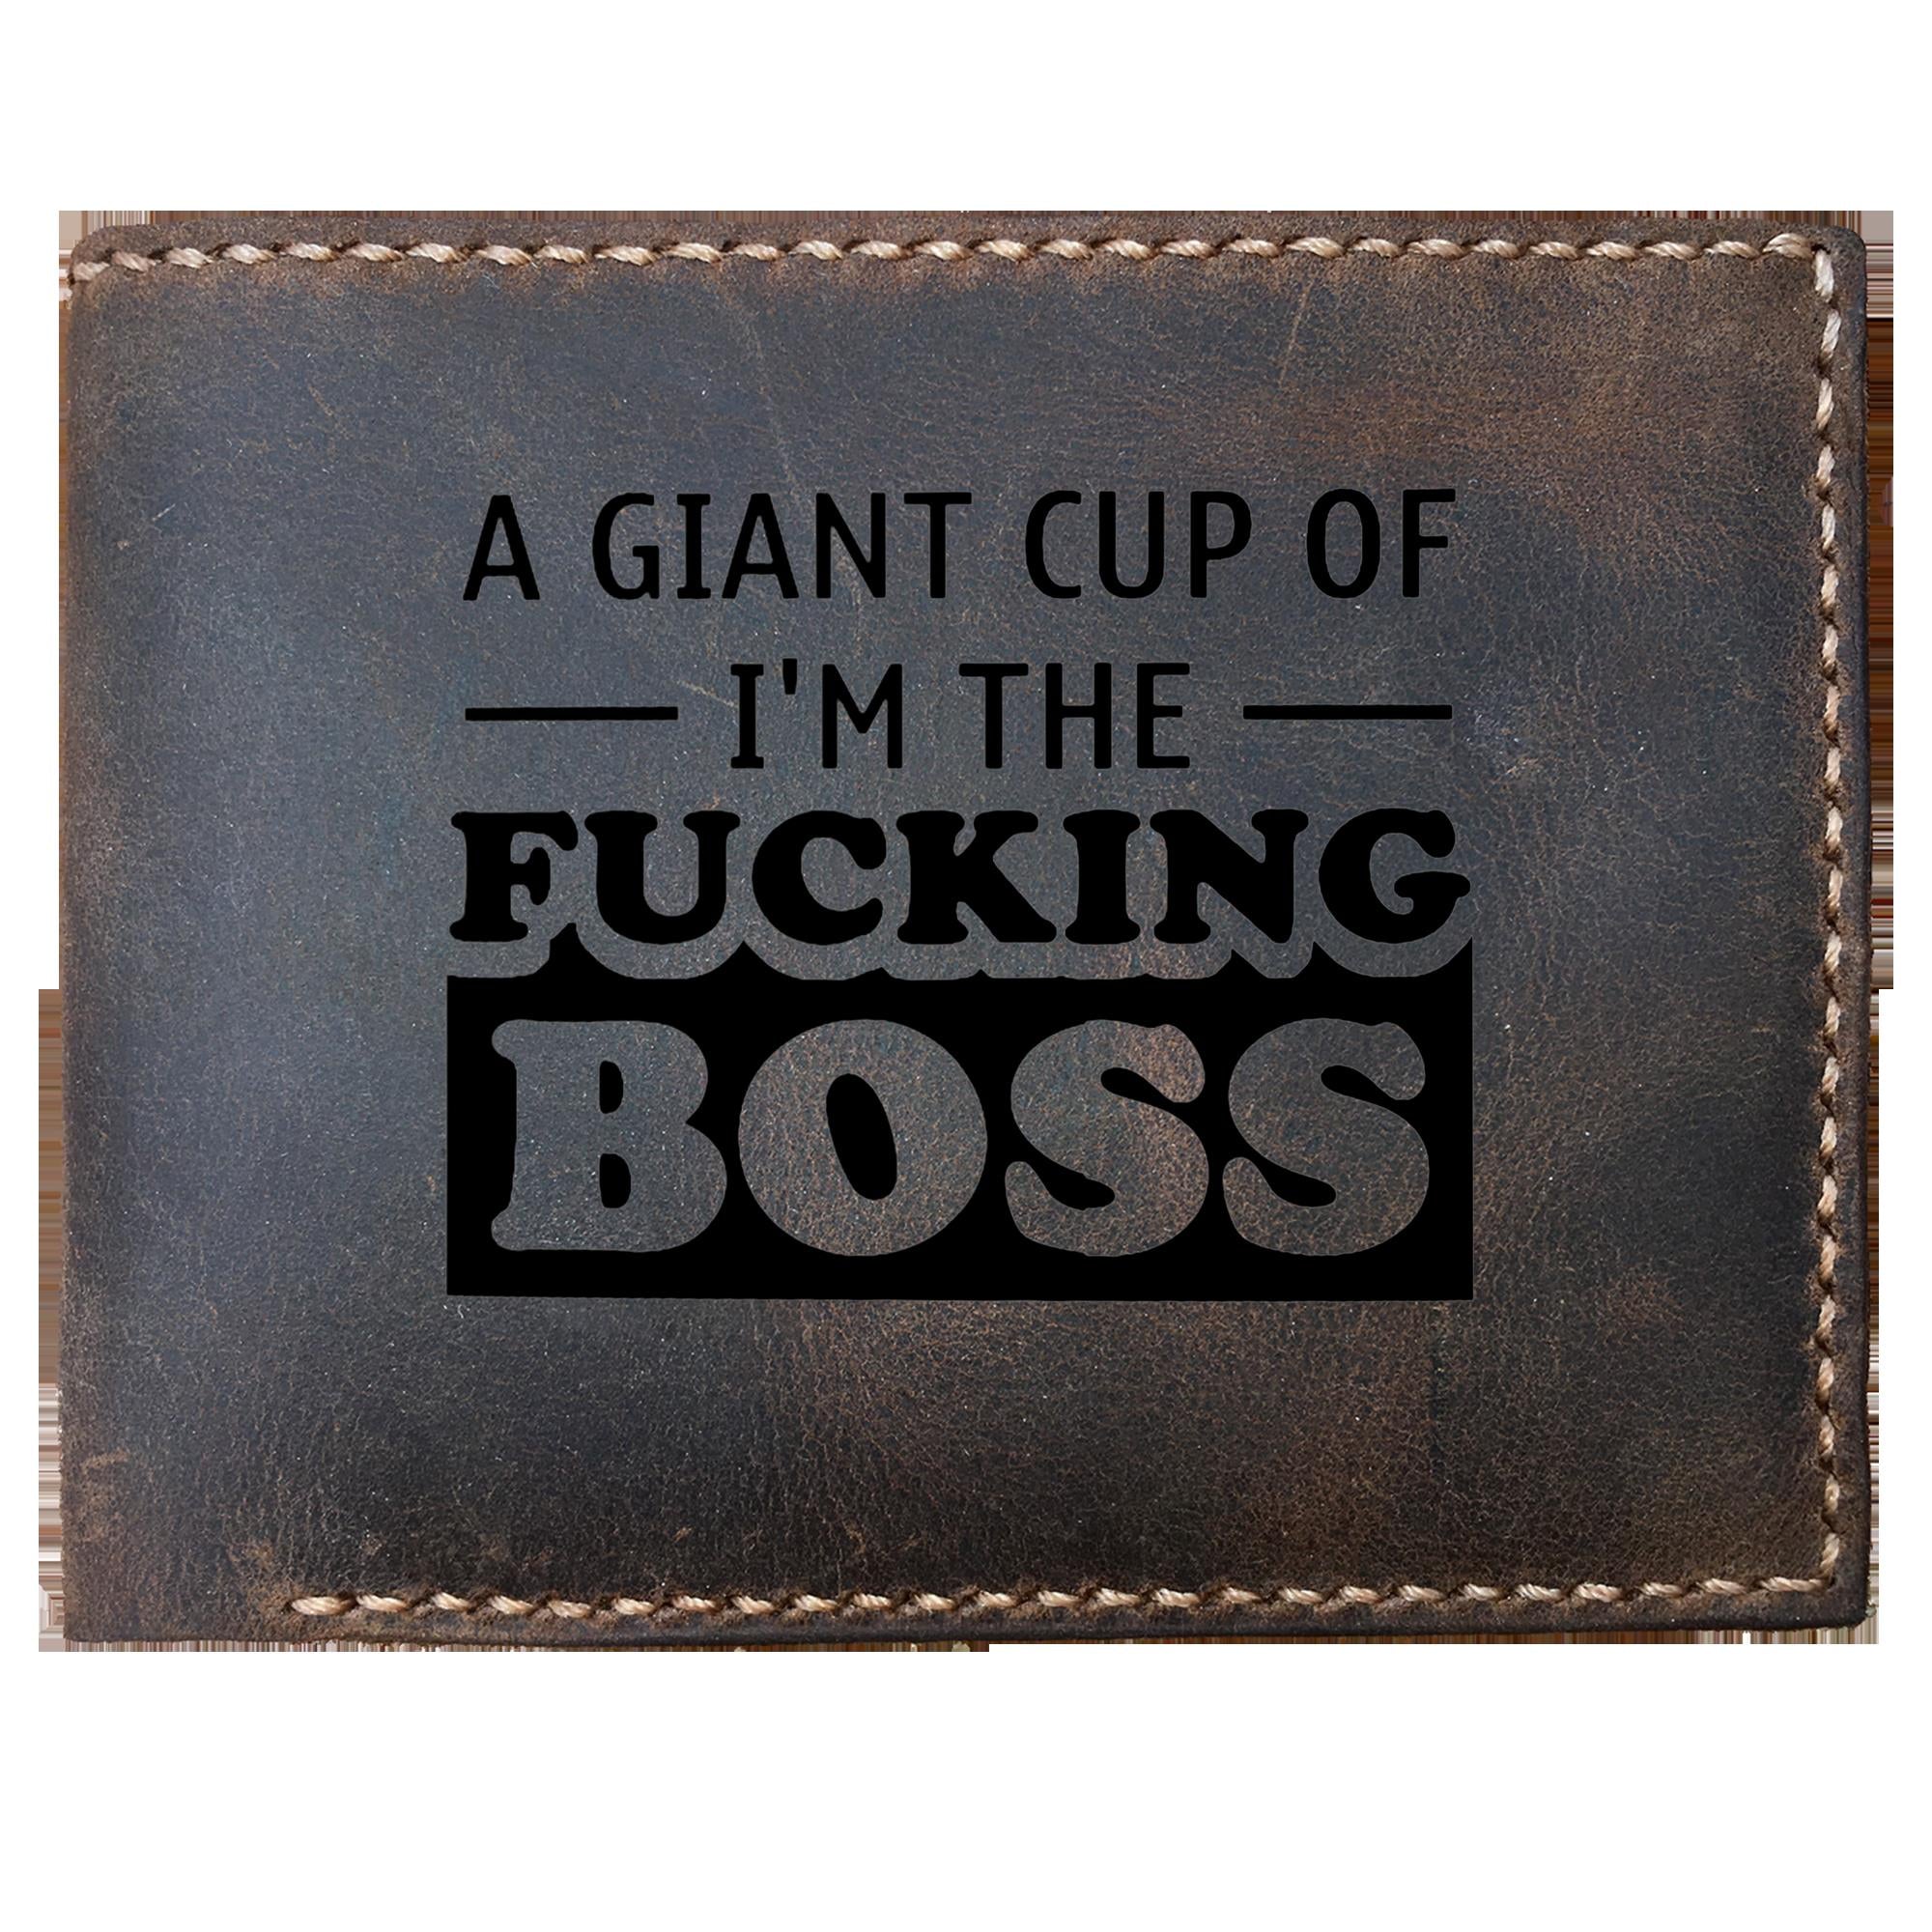 Skitongifts Funny Custom Laser Engraved Bifold Leather Wallet For Men, A Giant Cup Of Im The Fucking Boss, Best Bosss Ideas